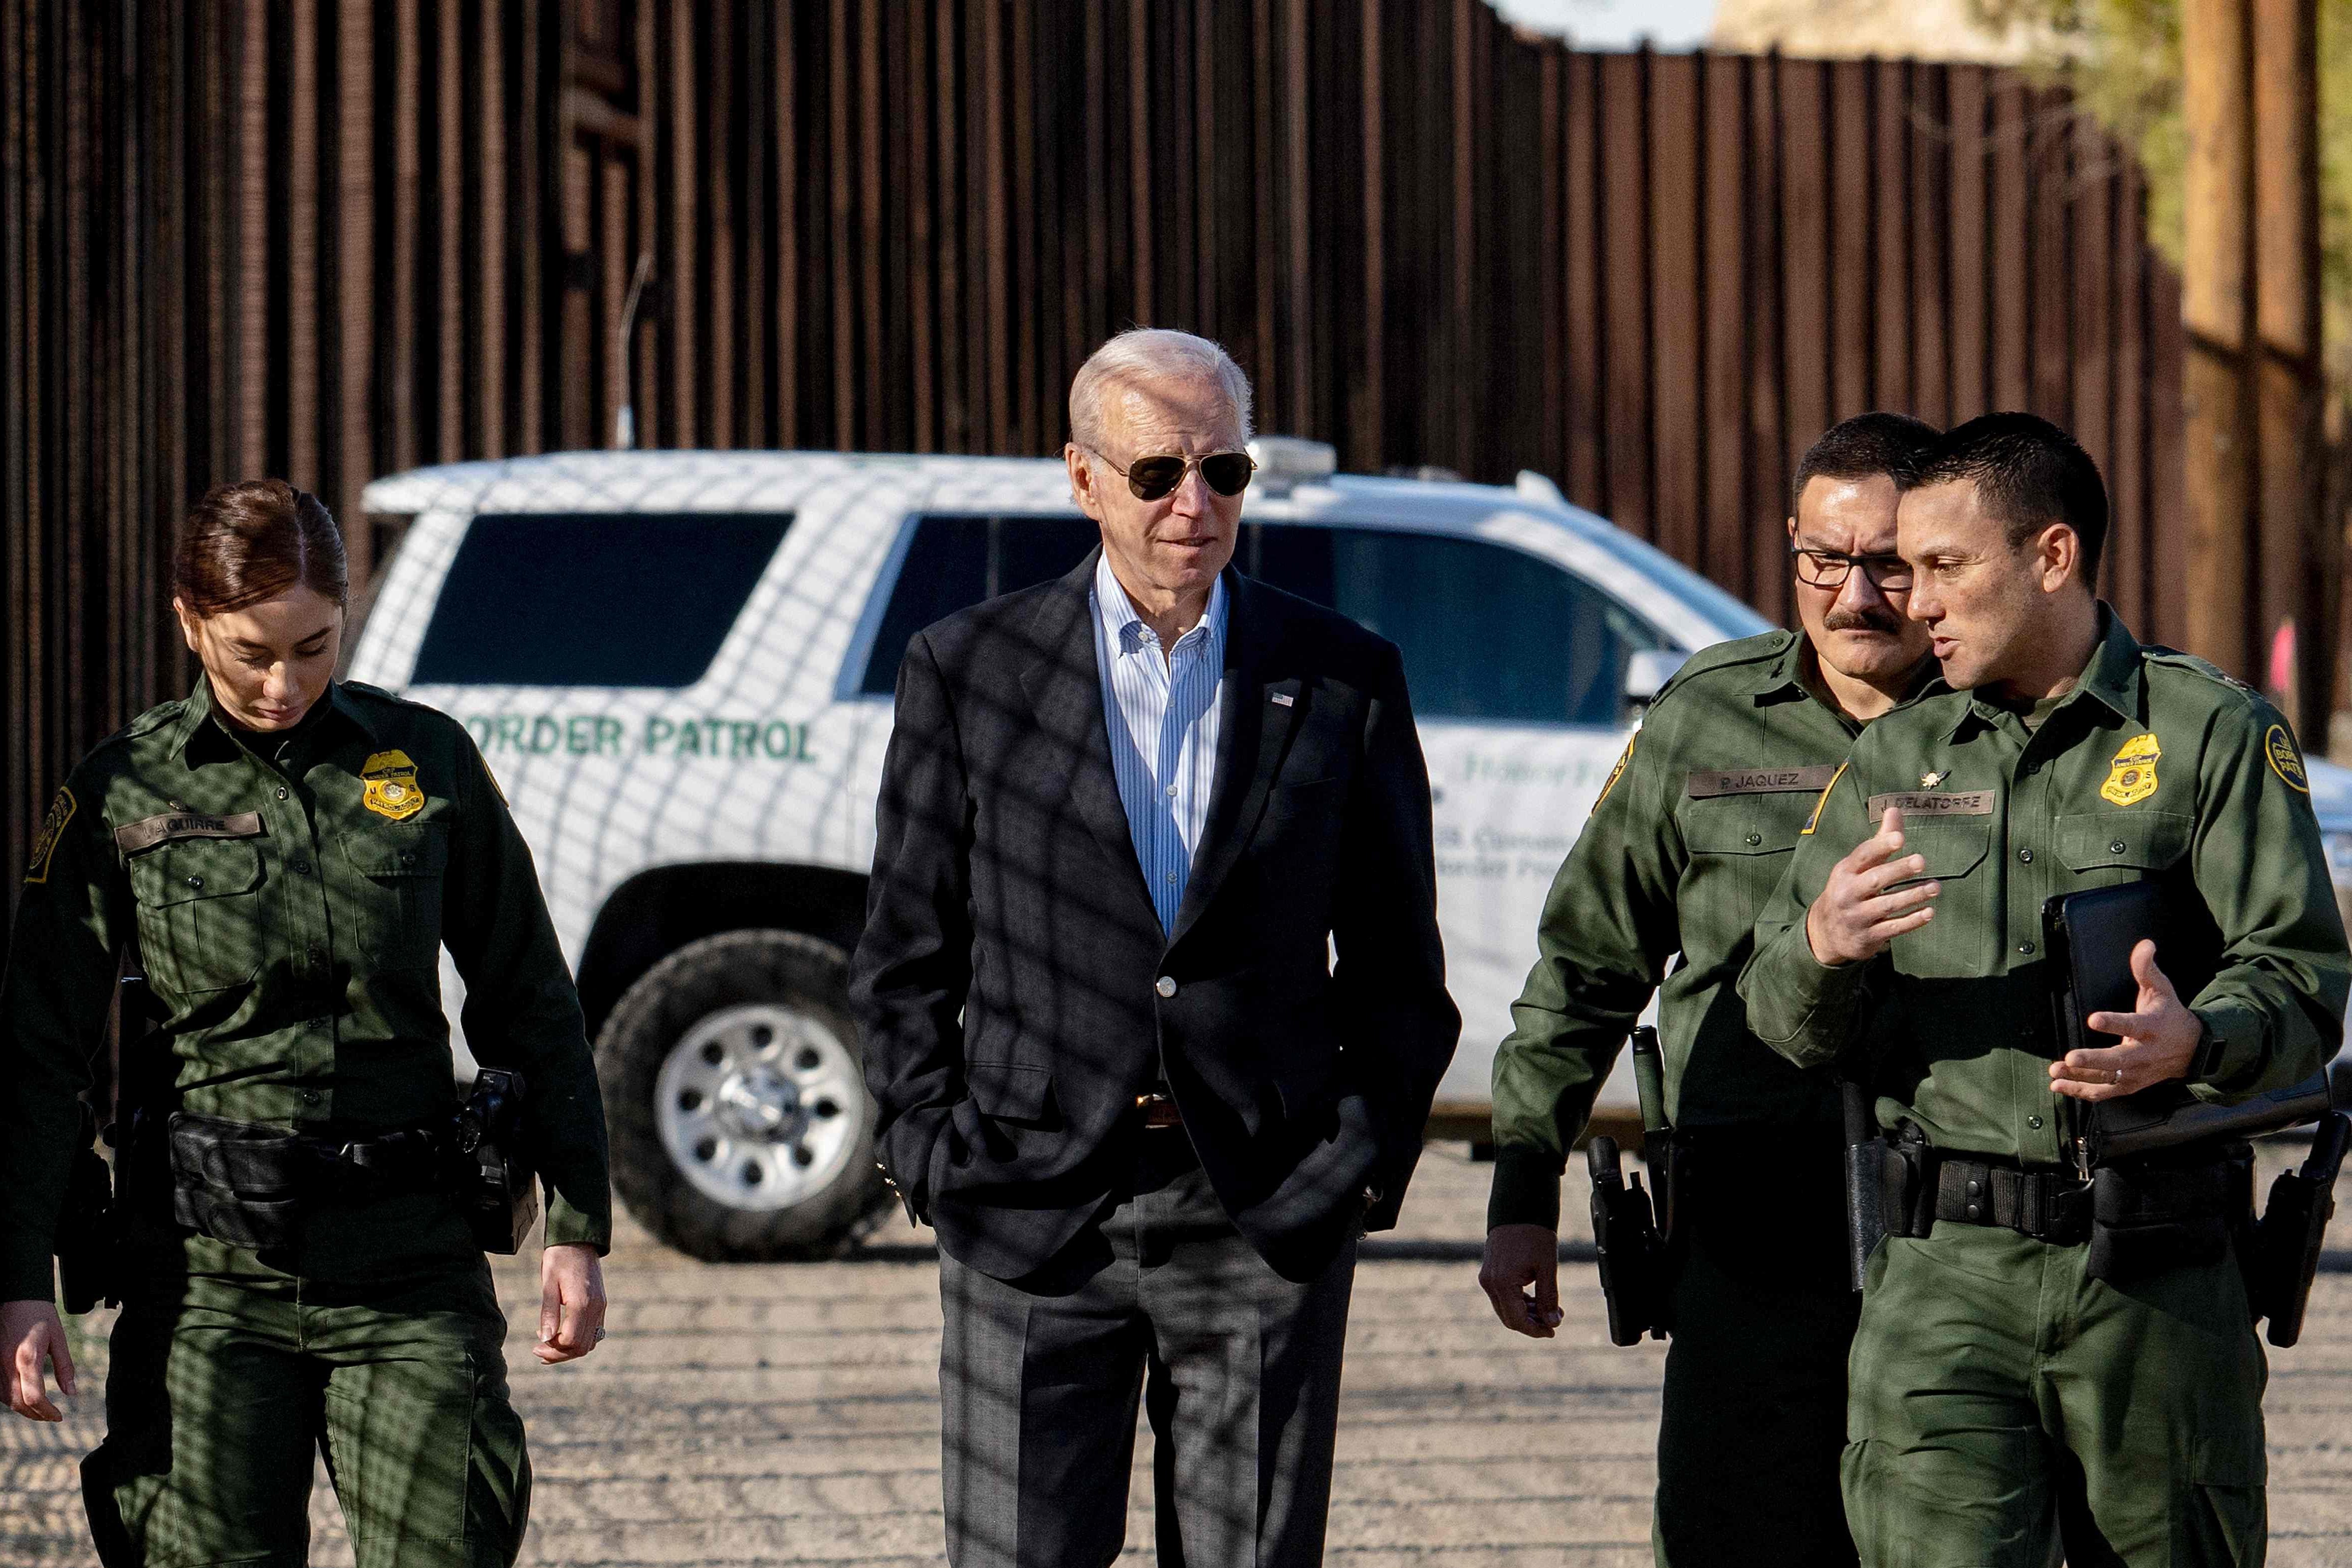 Biden and CBP officers walk together with a Border Patrol SUV and a tall border fence looming and receding behind them